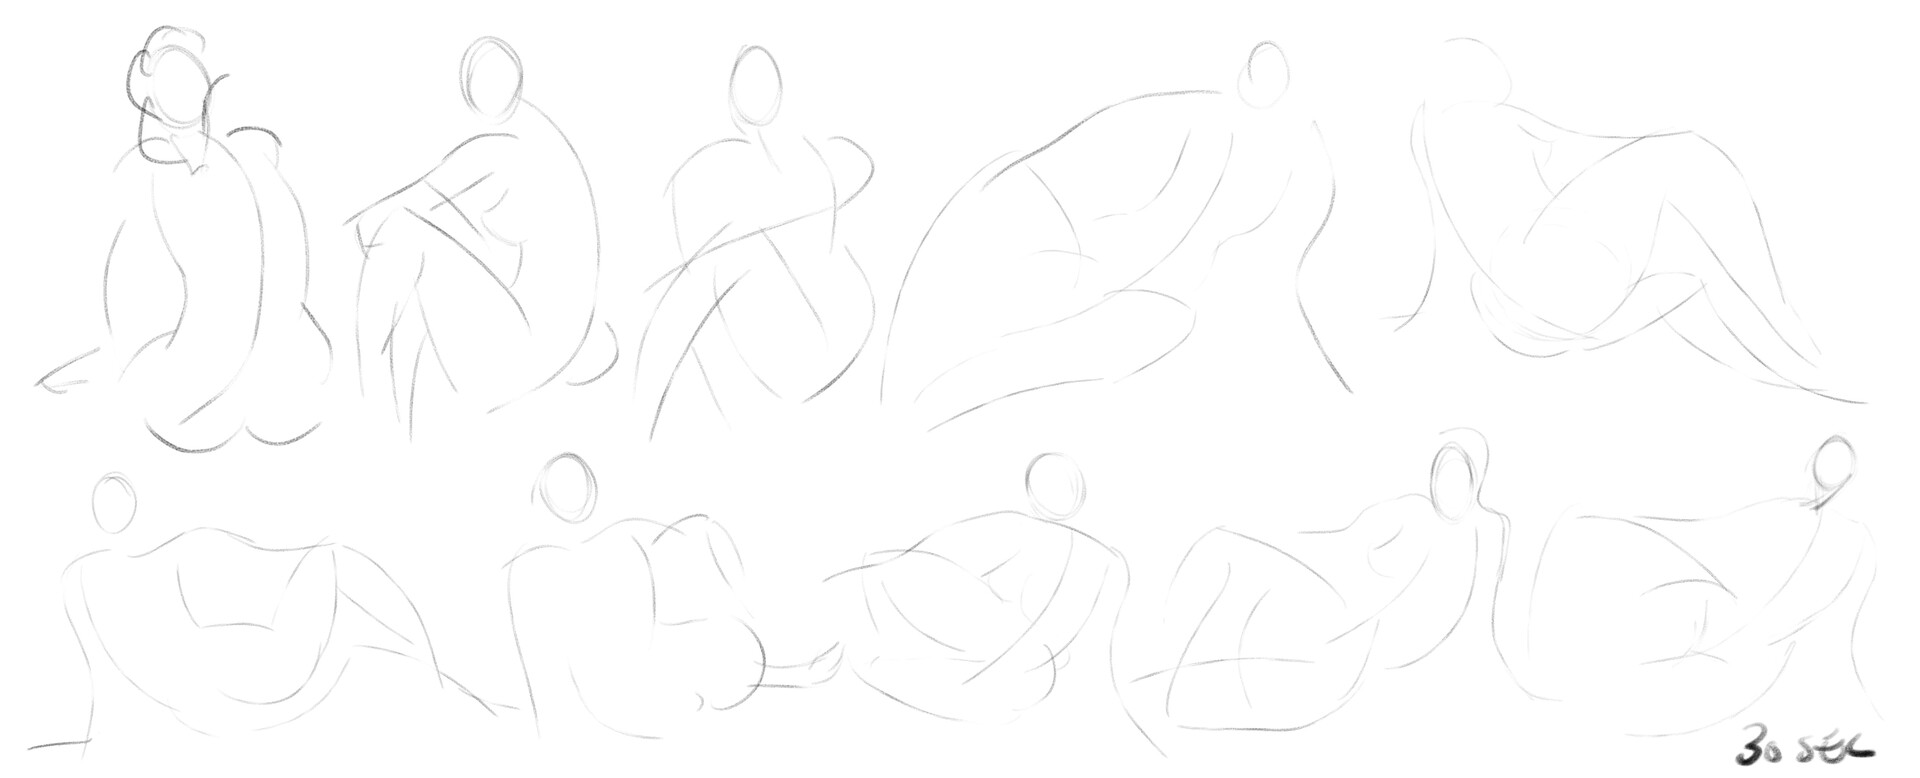 Pose Reference — So, the pdf downloads for my pose drawing and art...